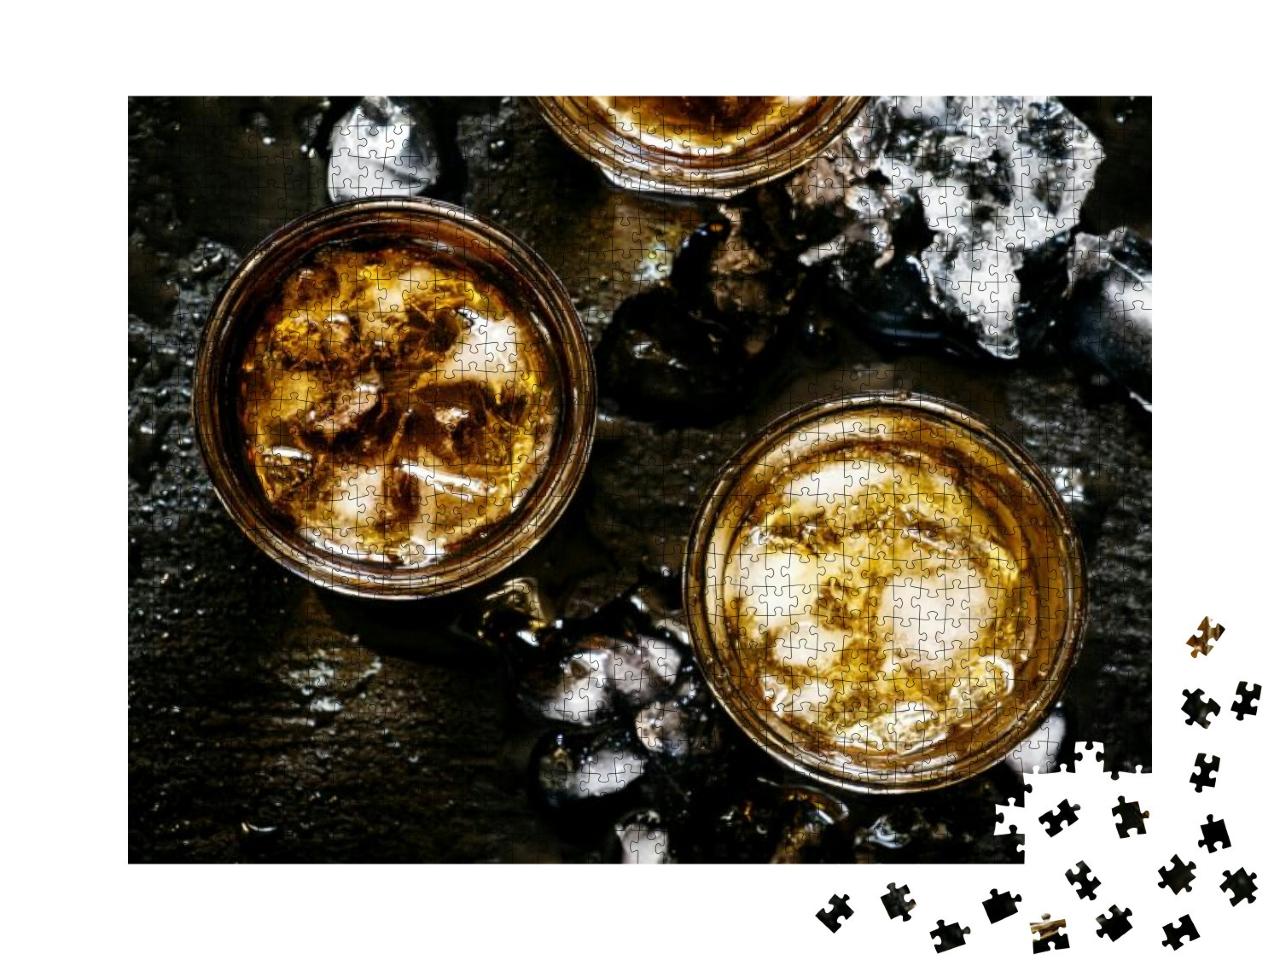 Cold Whiskey in a Glass with Crushed Ice on a Black Stone... Jigsaw Puzzle with 1000 pieces